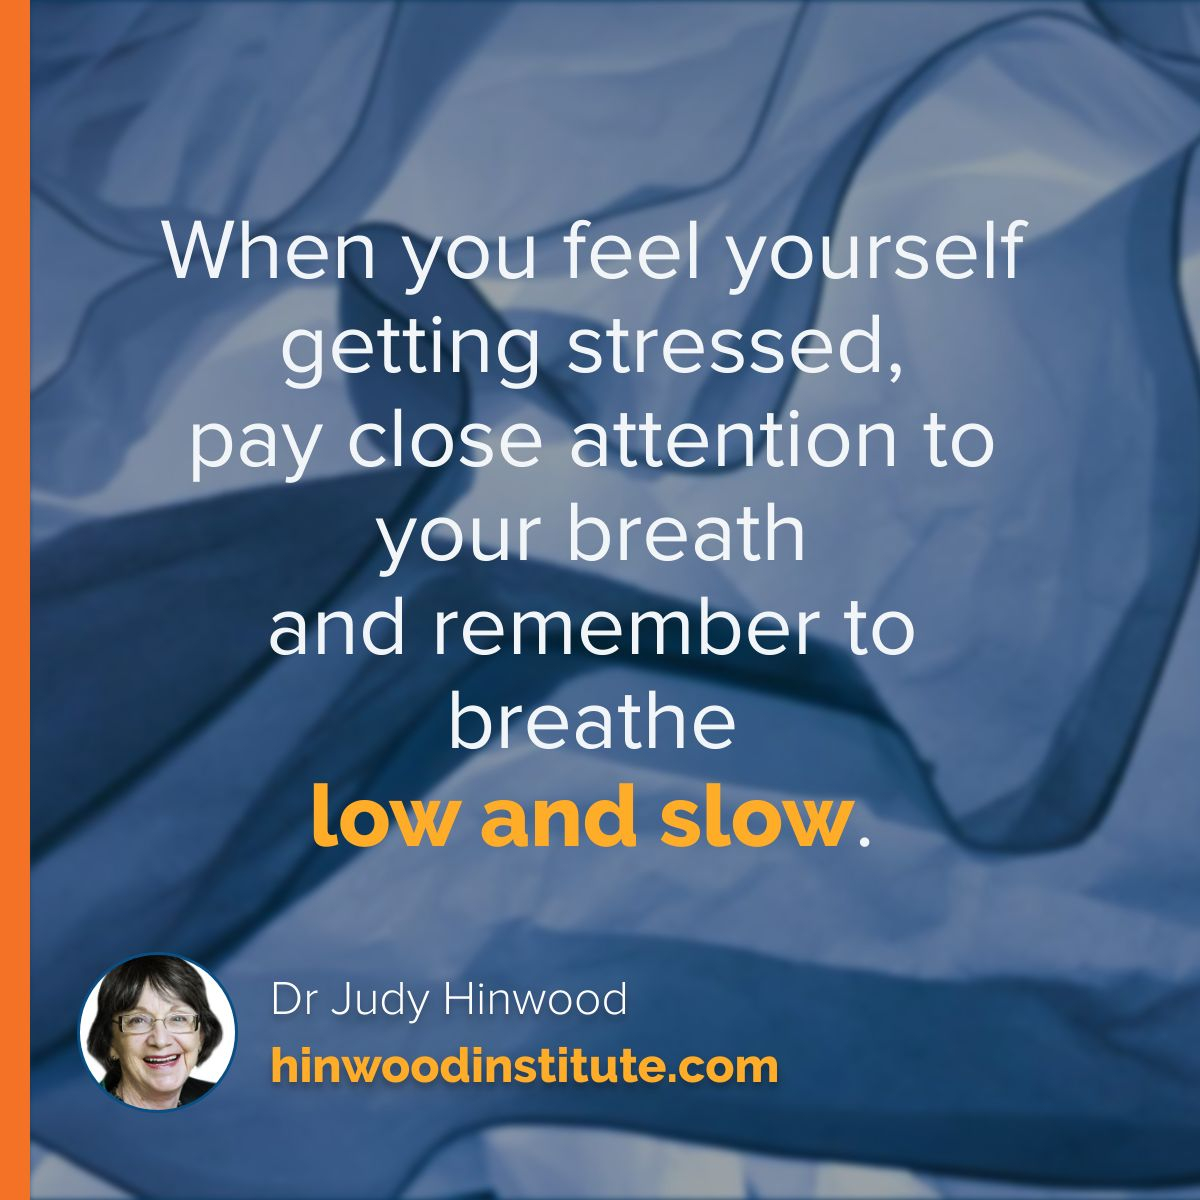 breathe low and slow - stress management